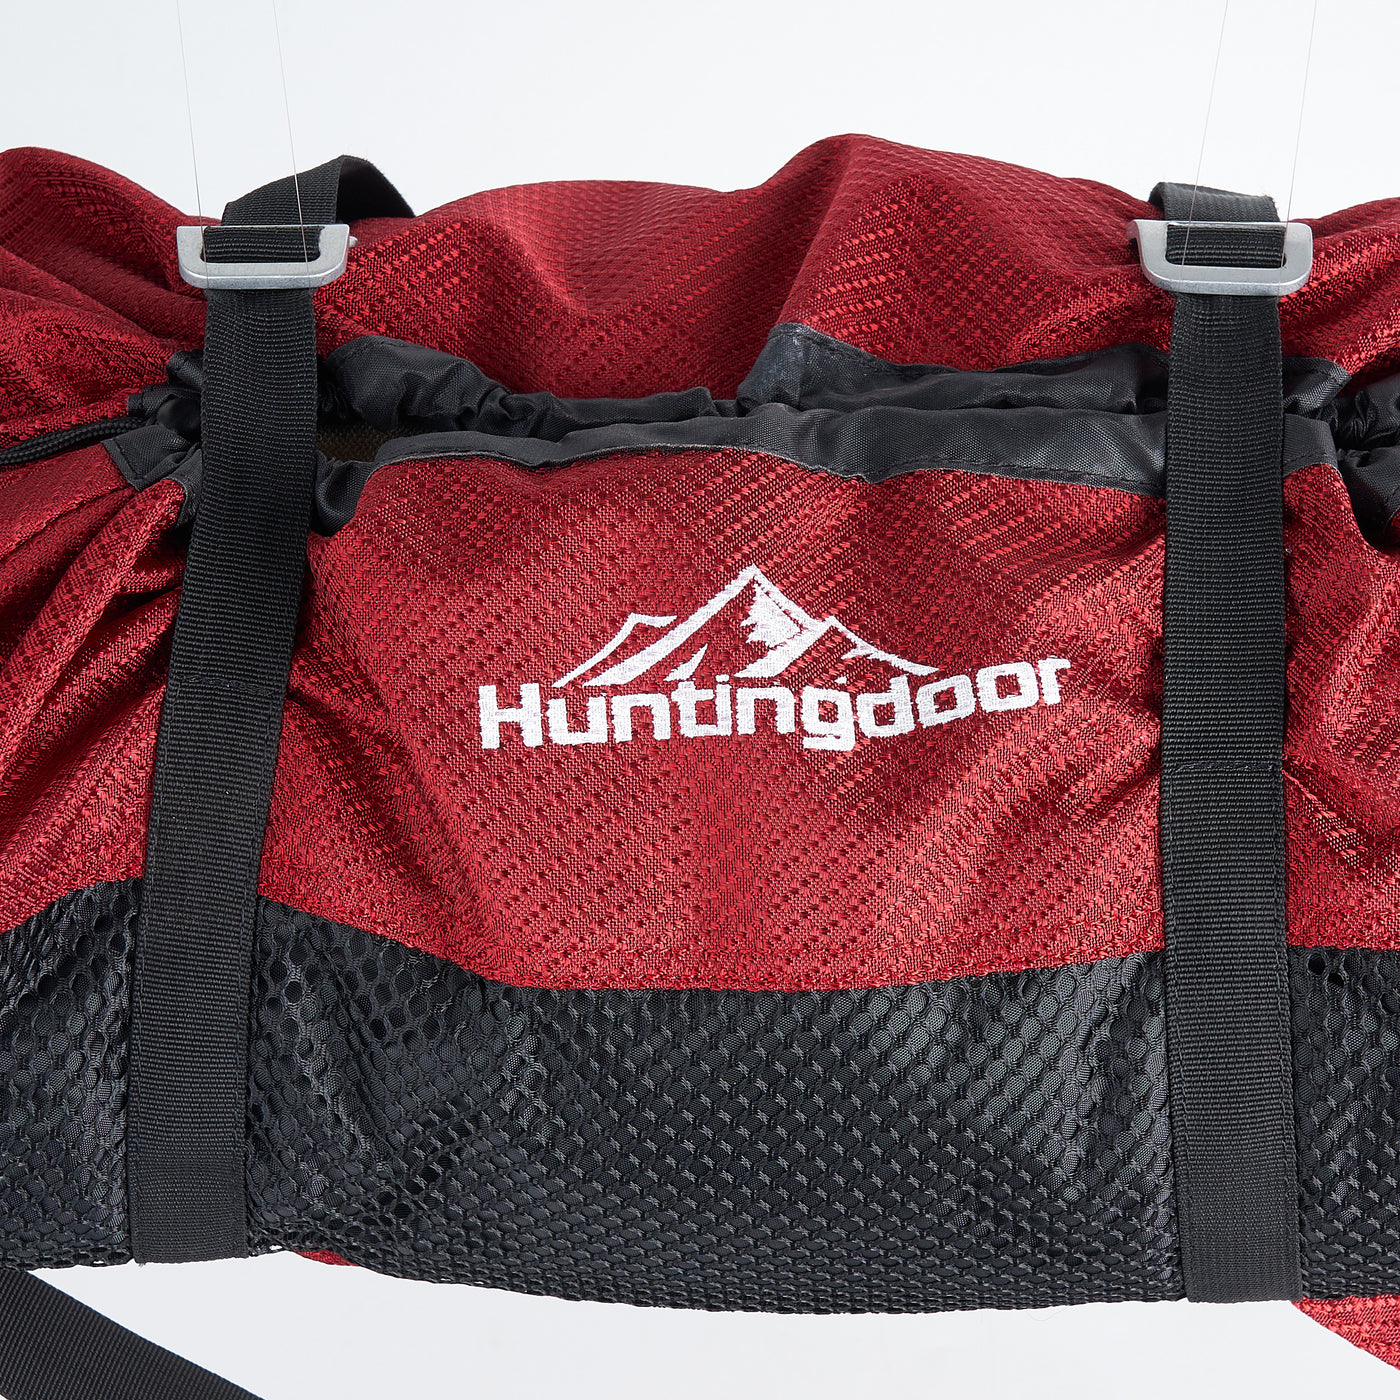 Huntingdoor Bags specially adapted for sports equipment Bags for Men Fitness Women Yoga Training Handbag